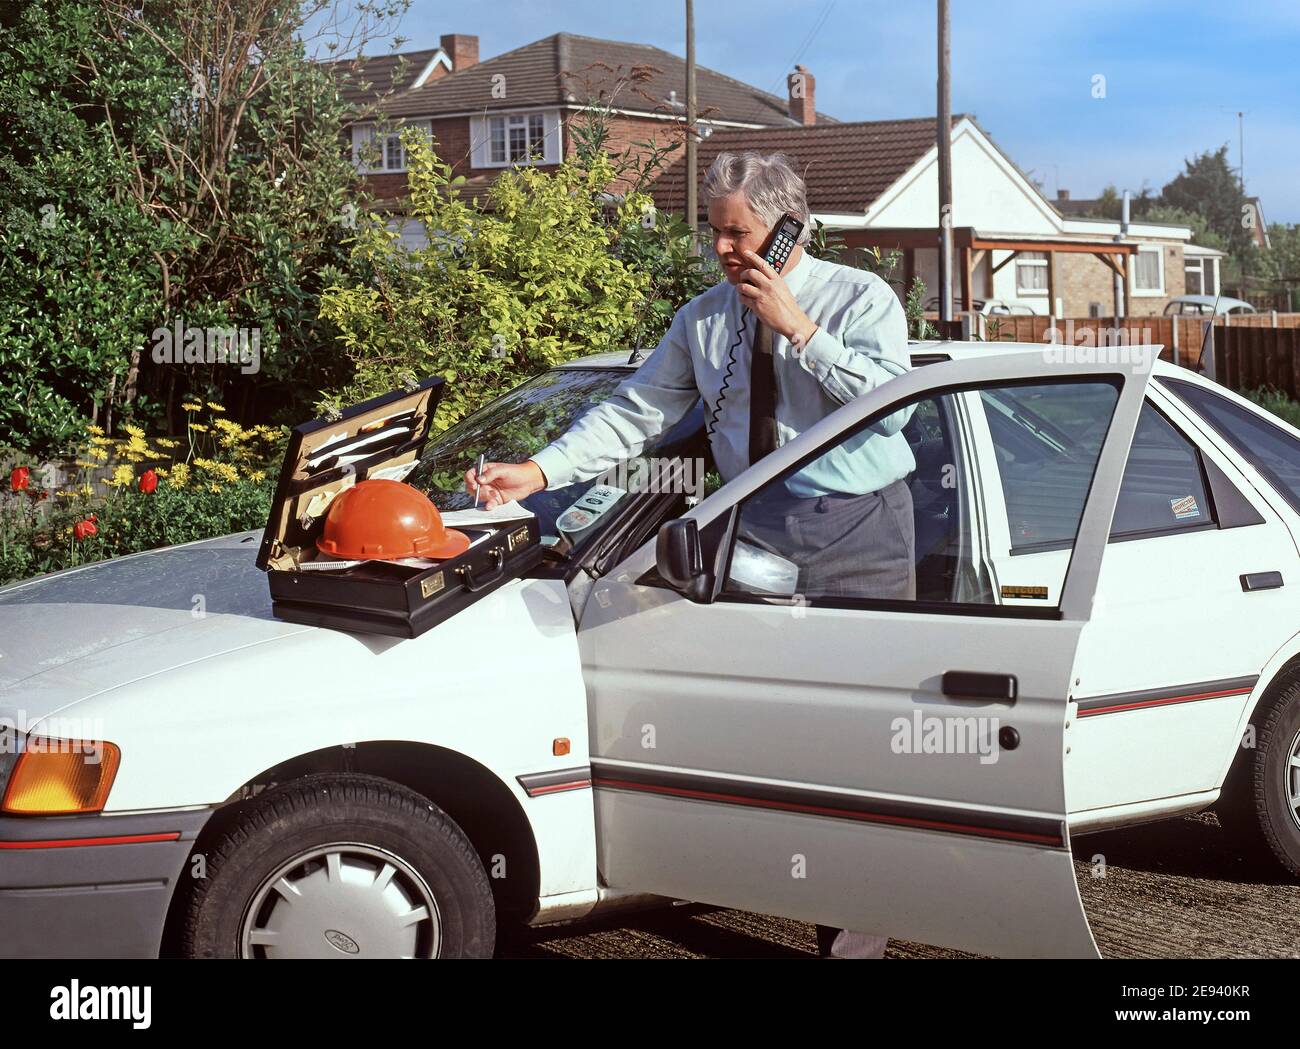 Image of business man a construction manager talking on a early tethered corded mobile phone from the open door of a Ford Escort company car historical archive 1990s Essex England UK Stock Photo